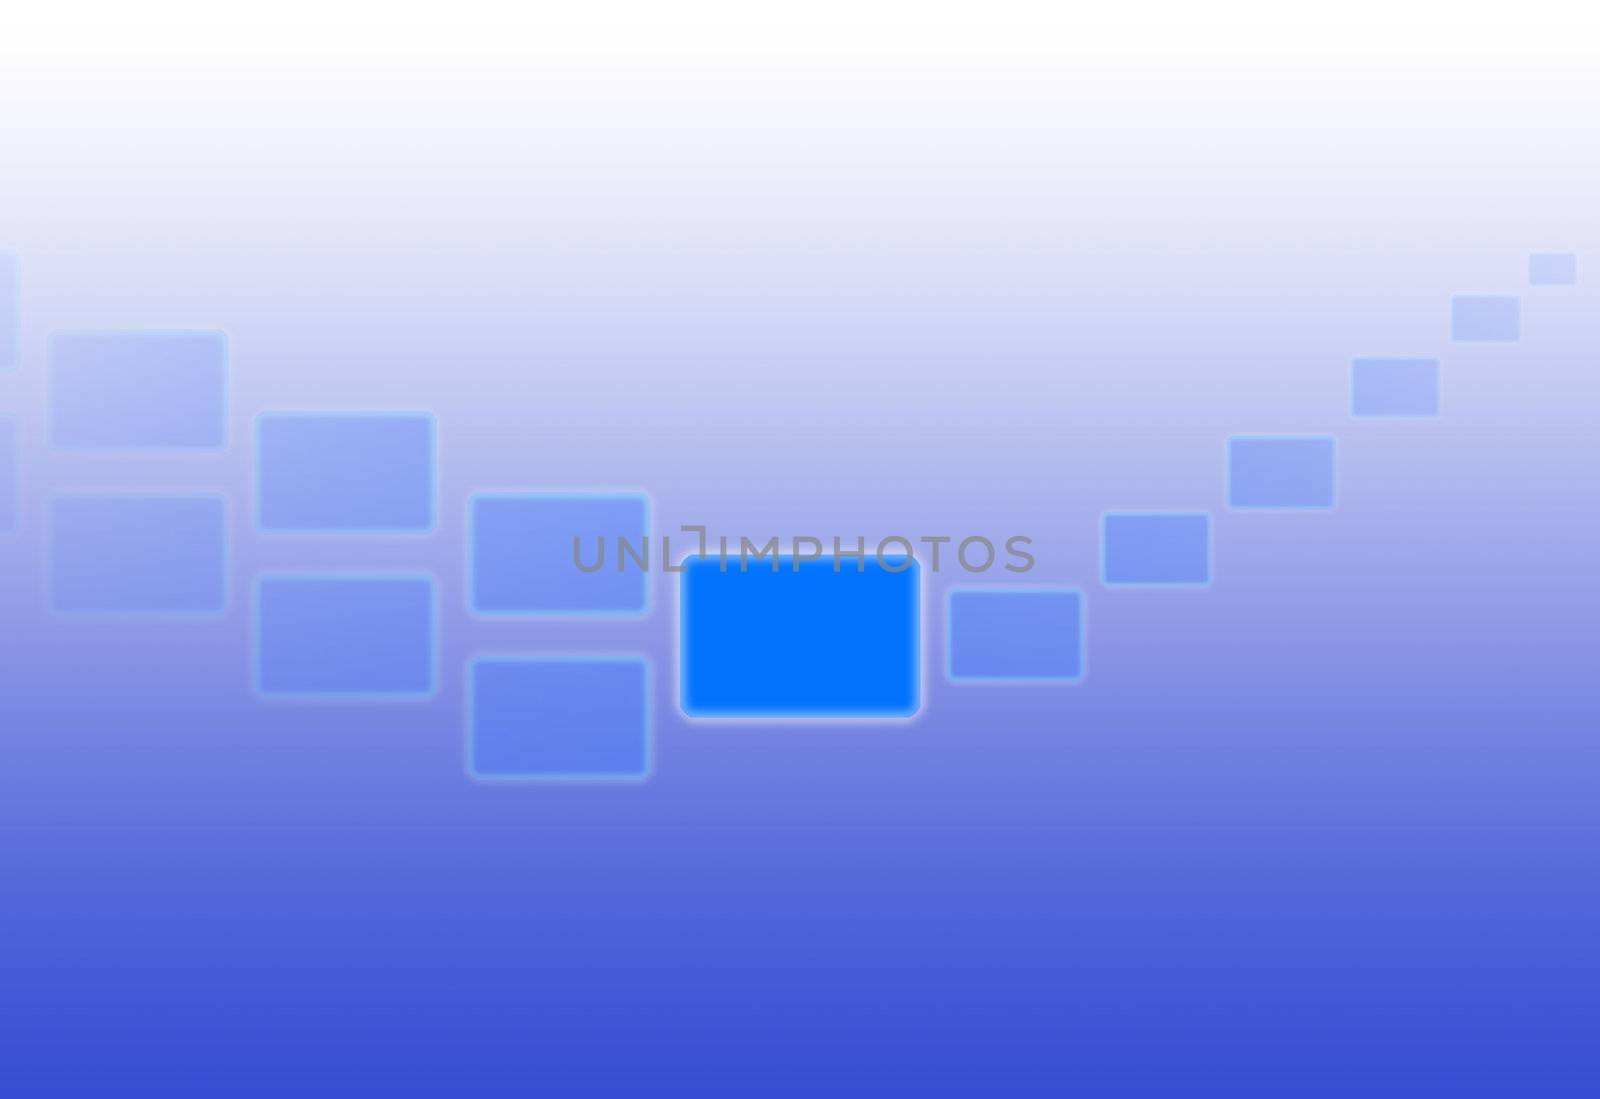 Blue rectangular shapes forming a curve against a gradient background